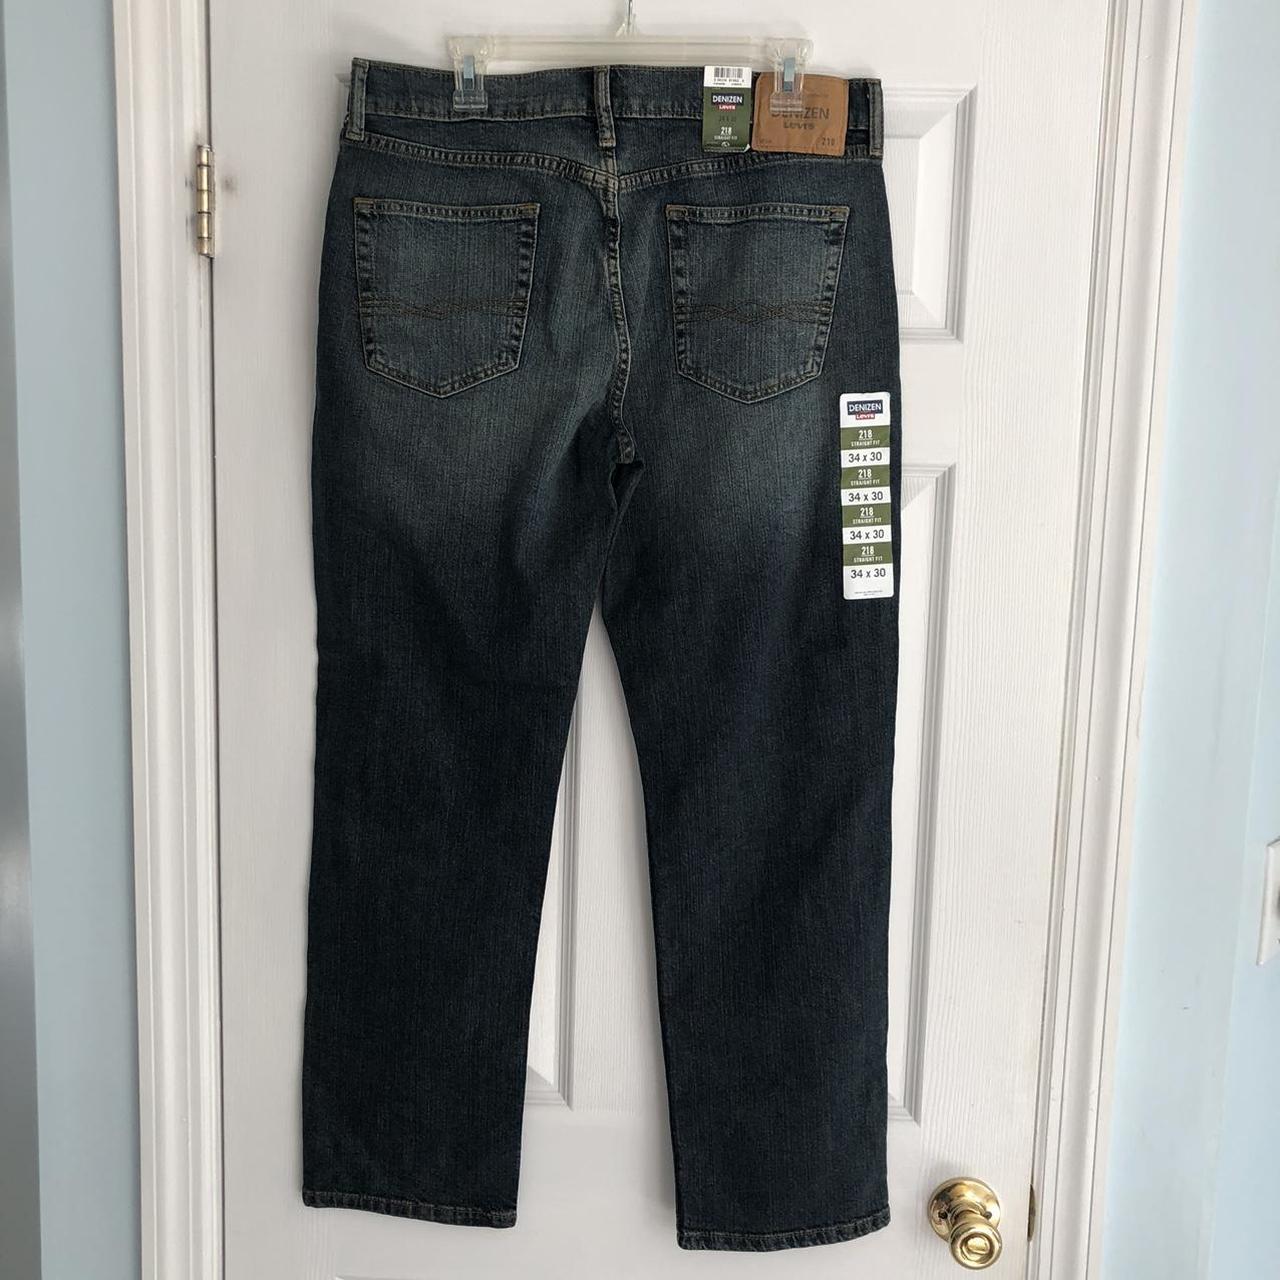 NWT modern denizen Levi’s 218 jeans with faded knees... - Depop